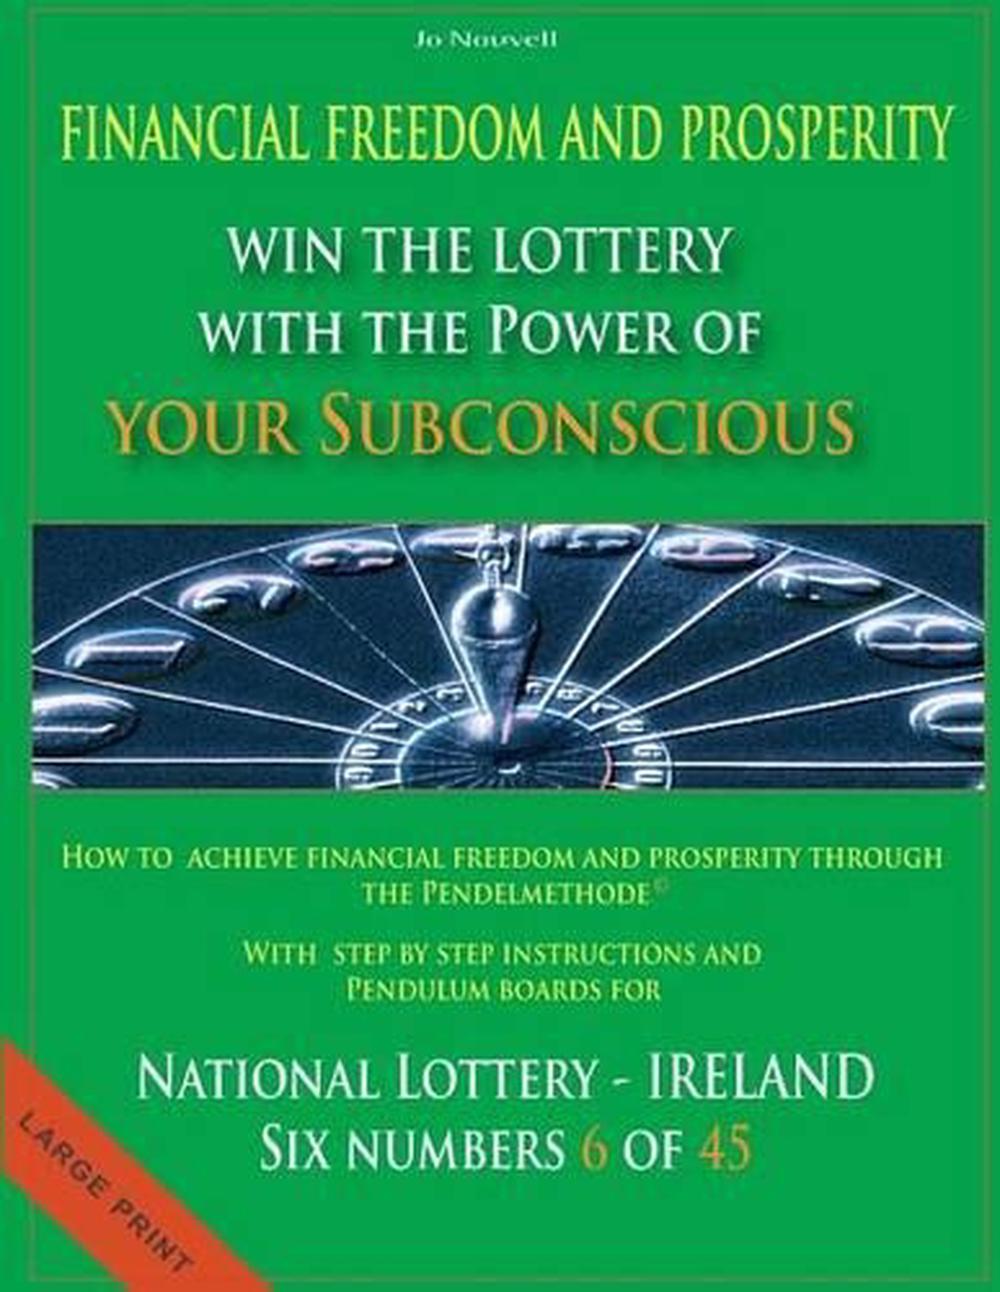 Financial Freedom and Prosperity Win the Lottery with the Power of